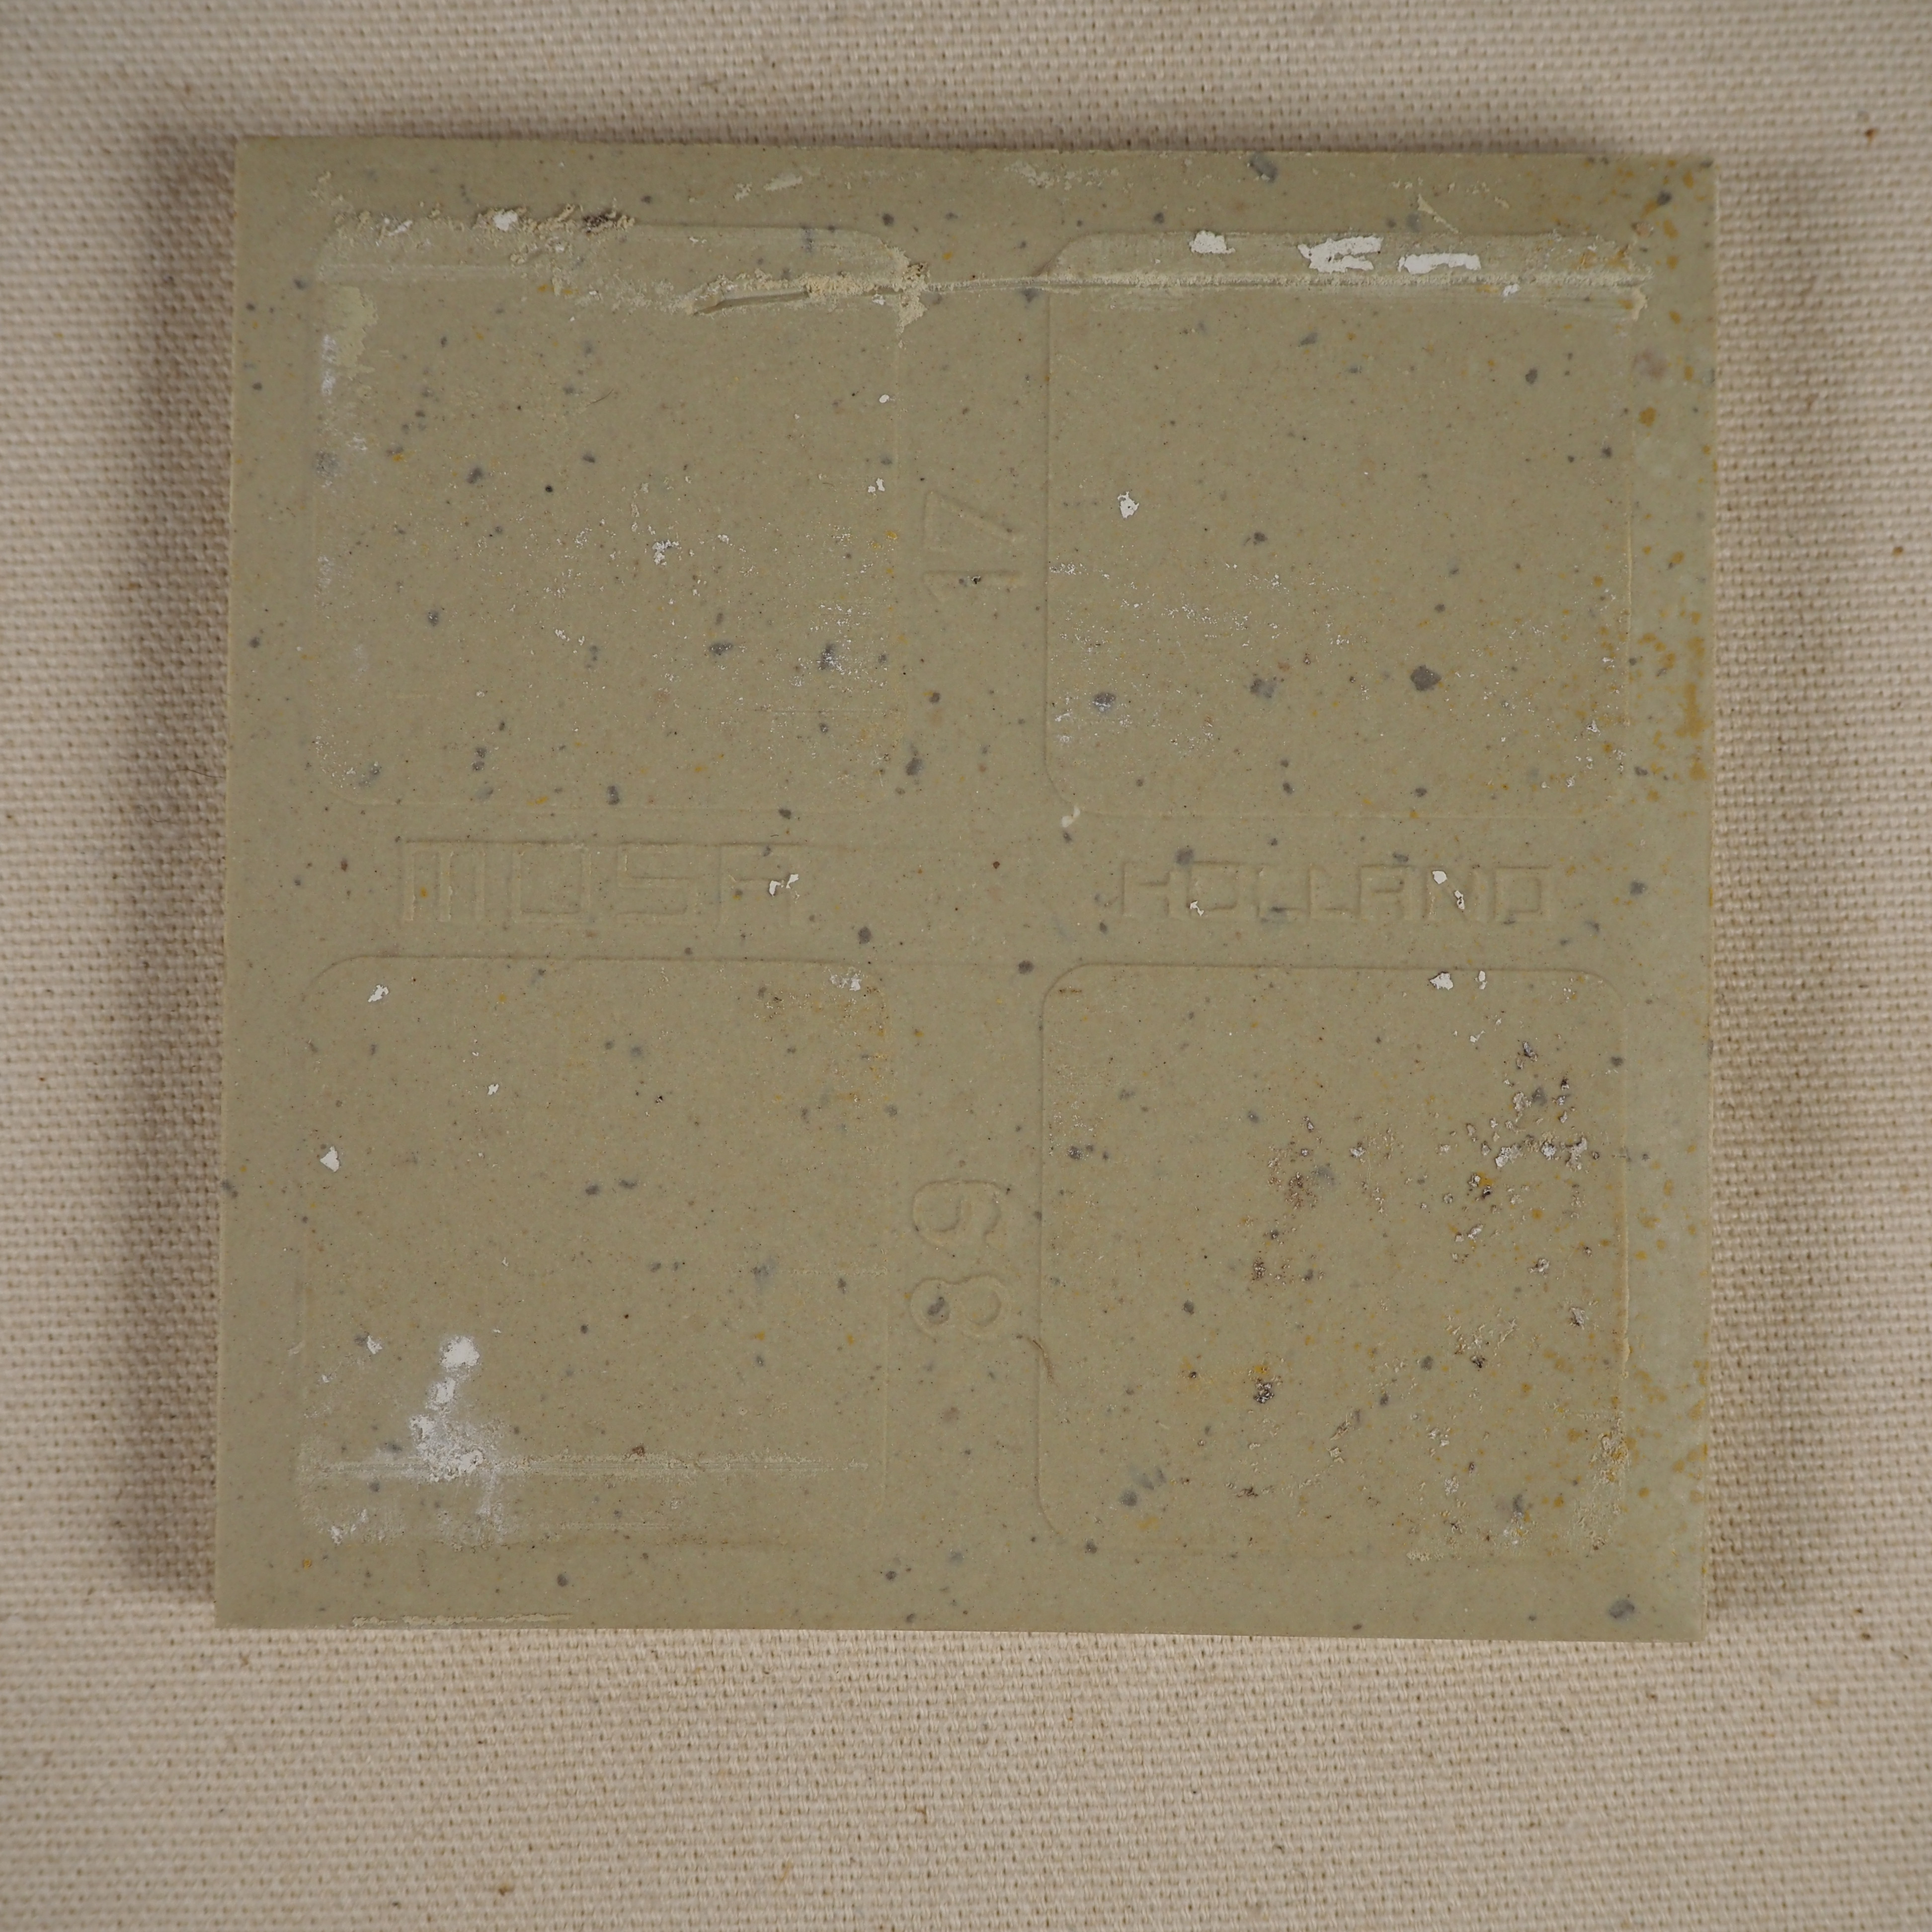 Speckled yellow ceramic tiles by Royal Mosa (100 x 100 mm)